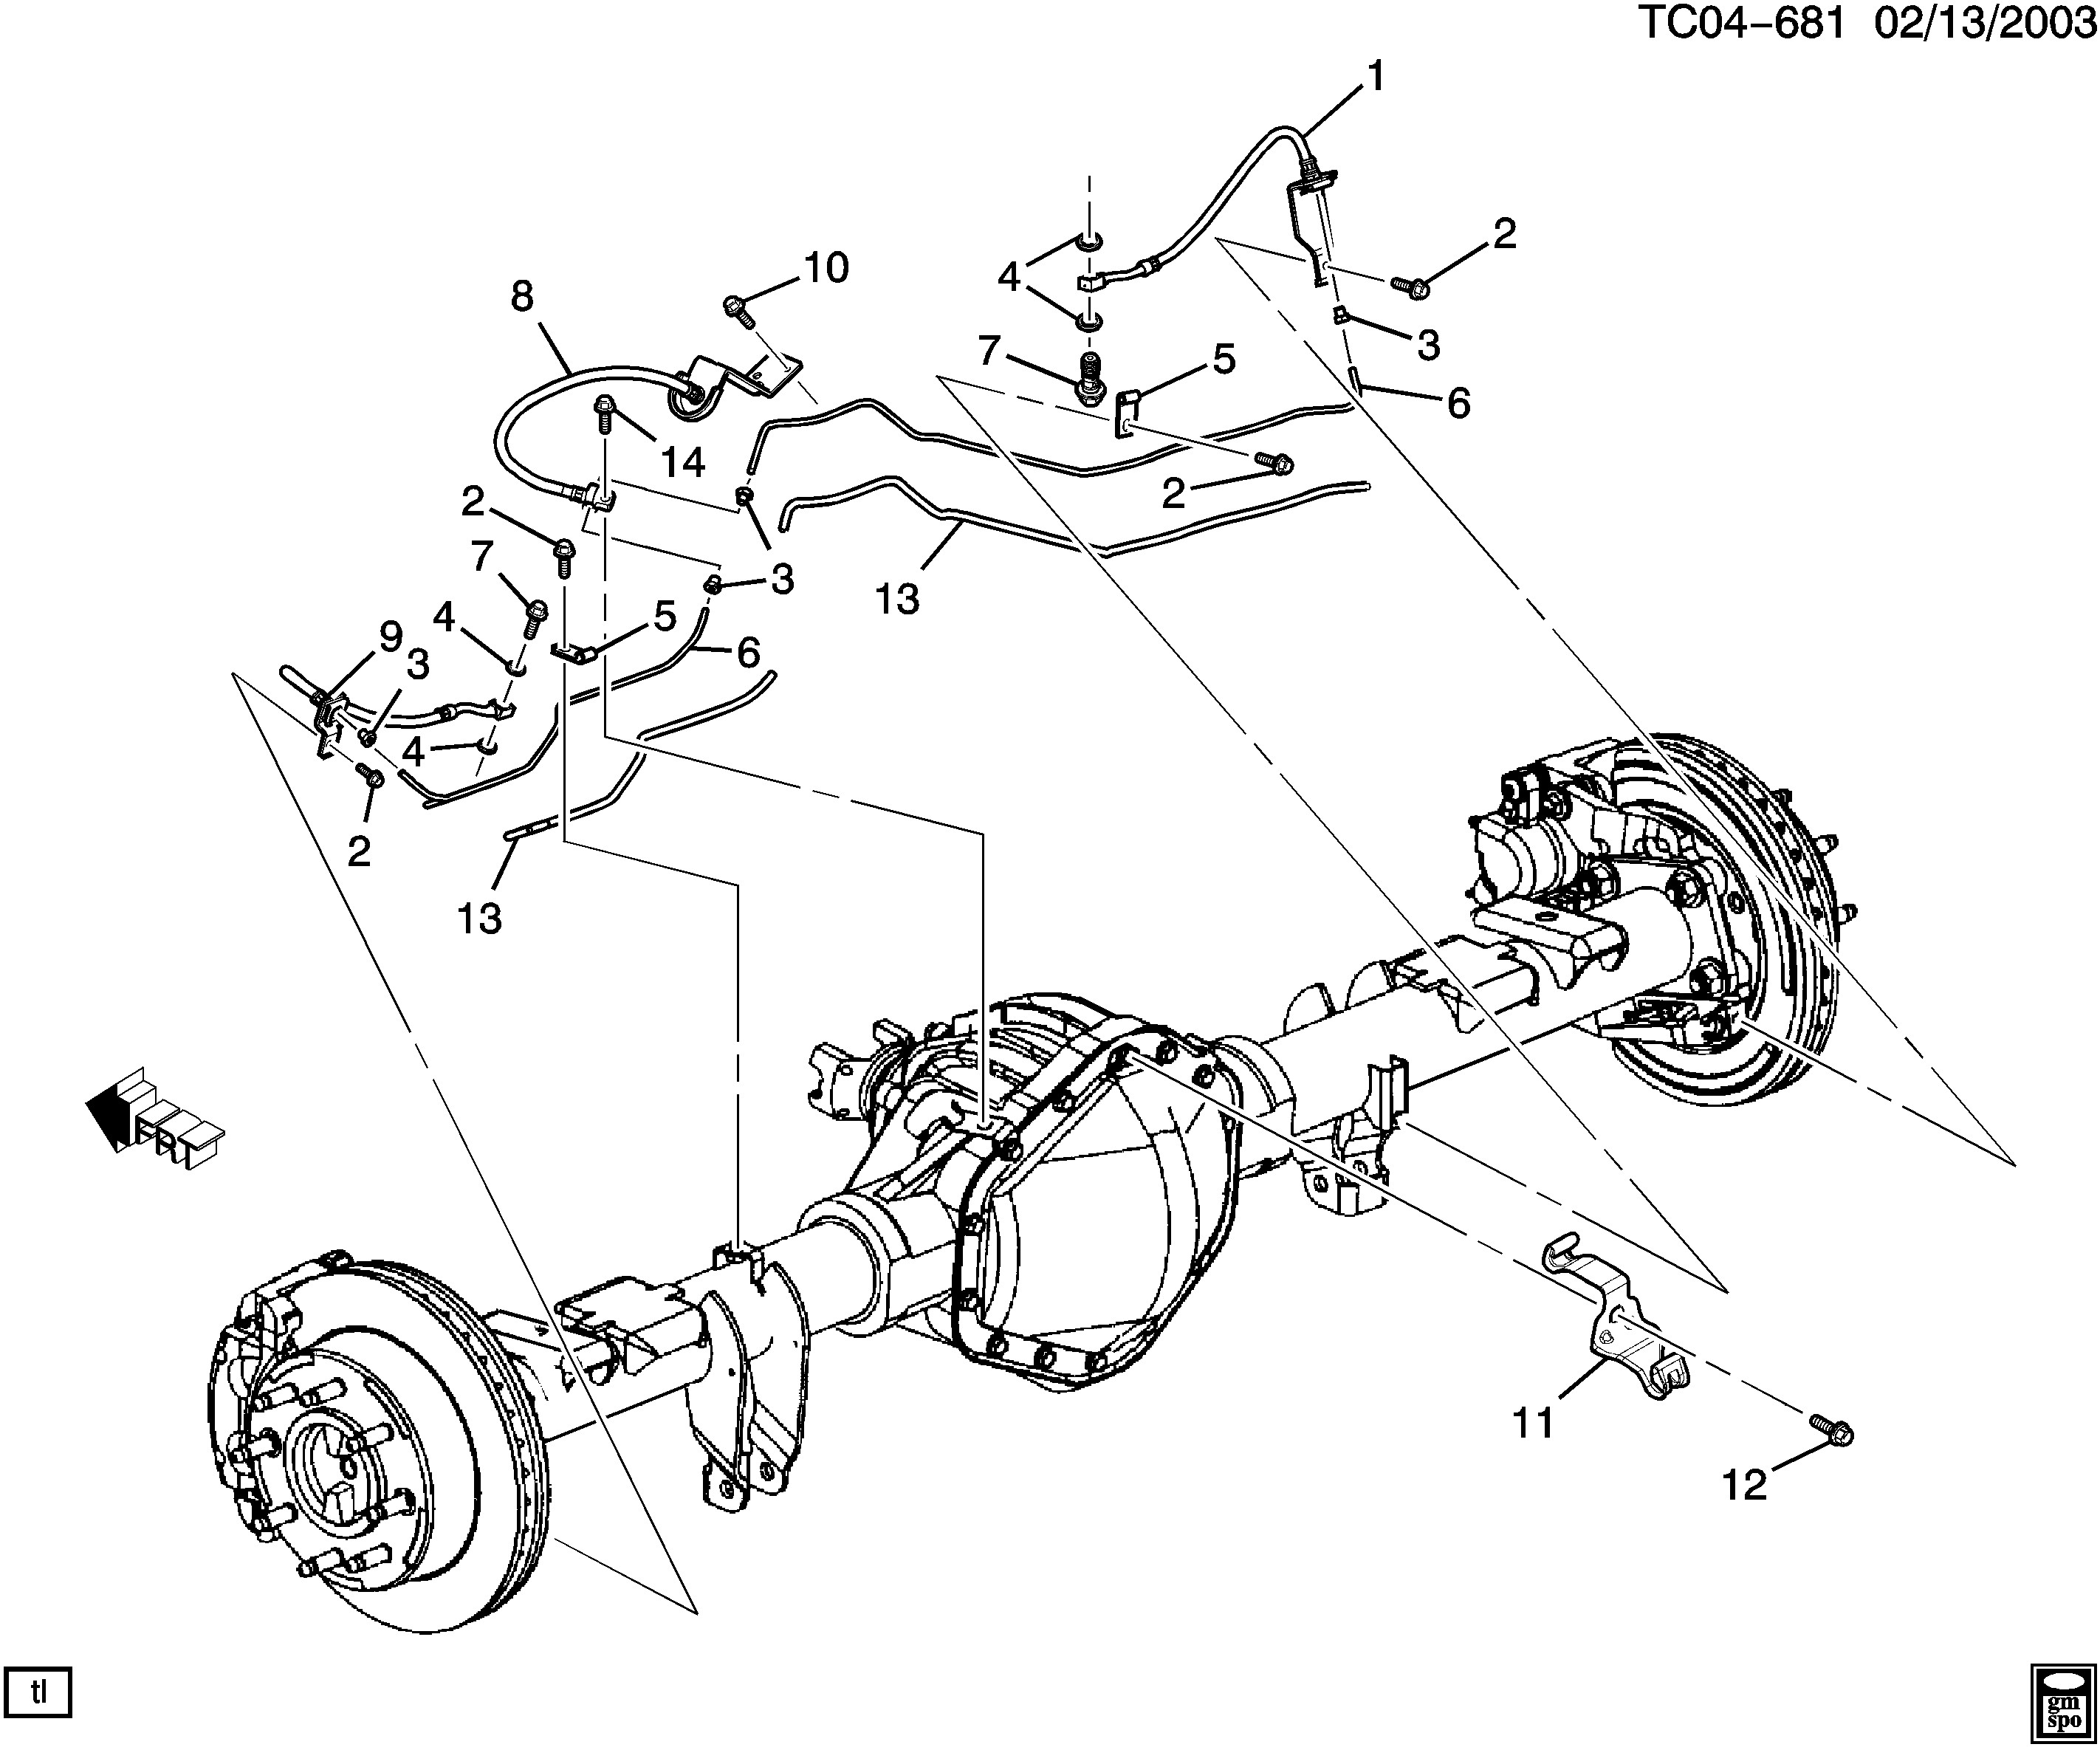 2002 Chevy Avalanche Parts Diagram Avalanche 1500 2wd Brake Lines Rear Chevrolet Epc Line Of 2002 Chevy Avalanche Parts Diagram